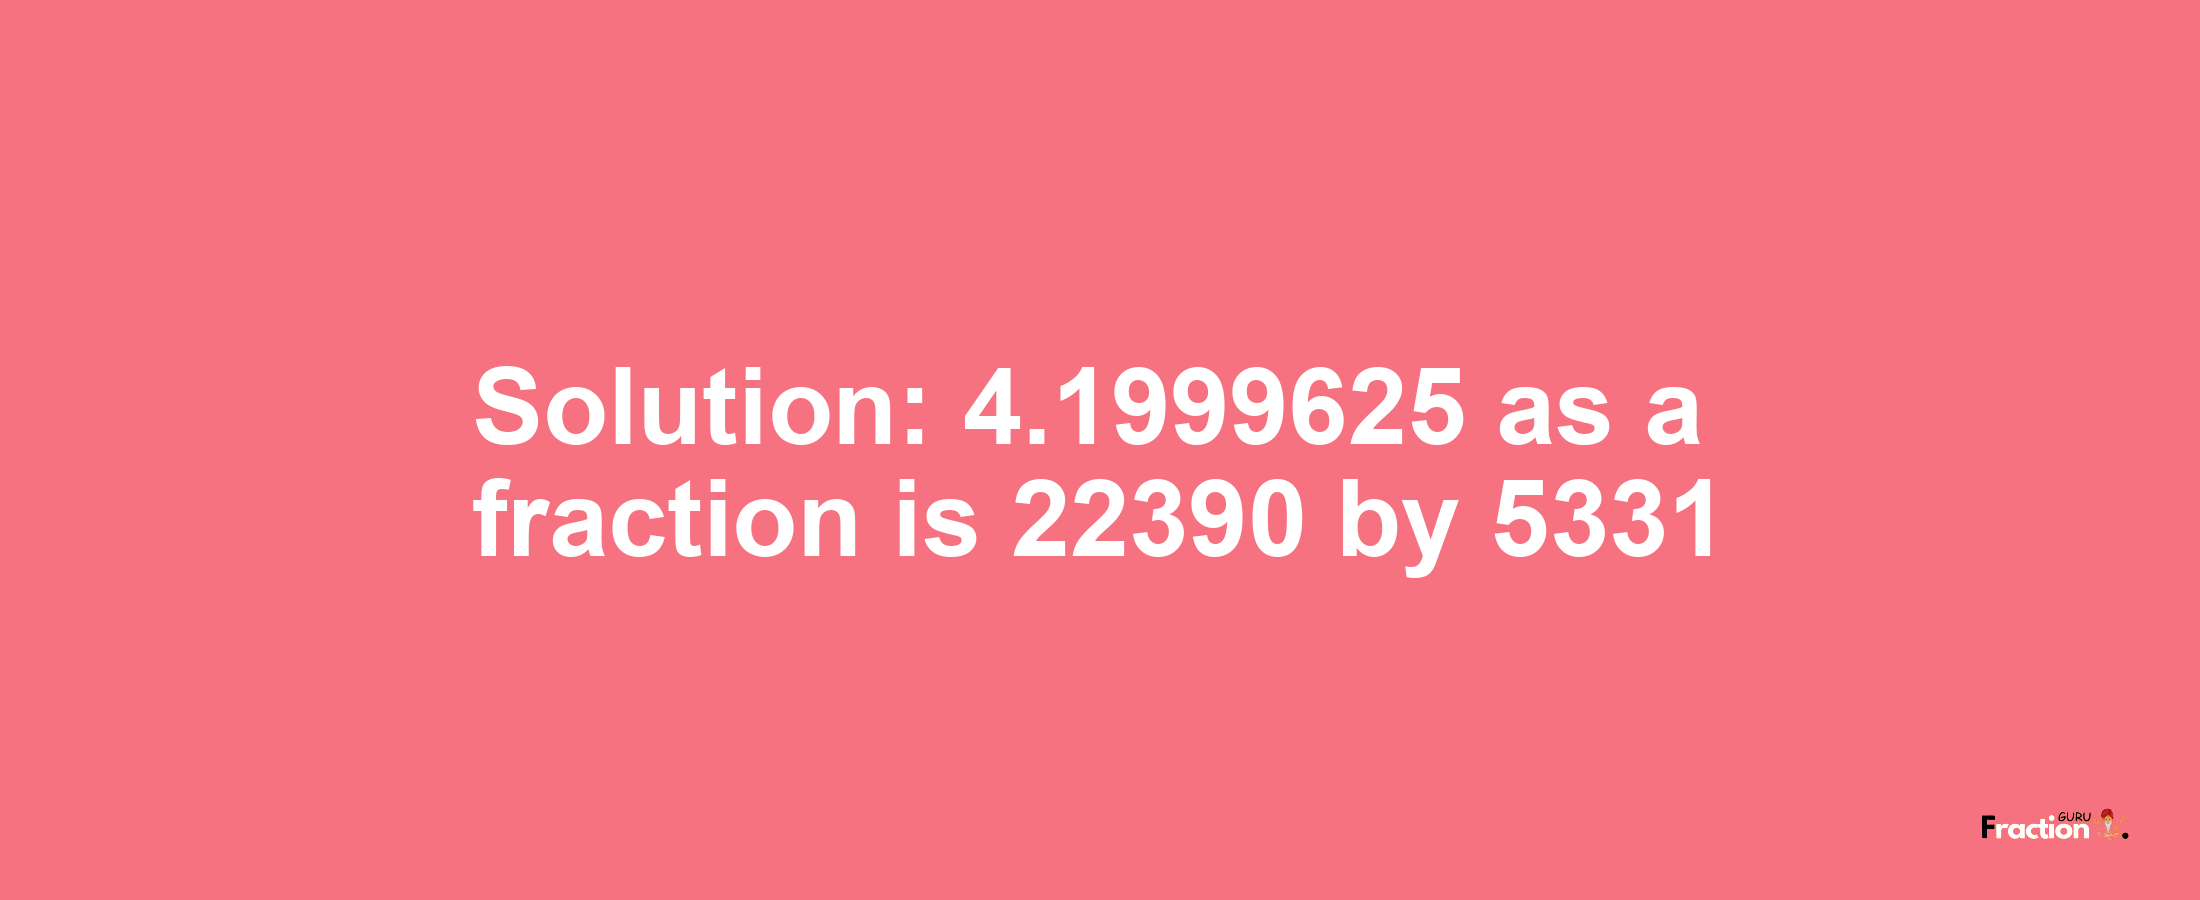 Solution:4.1999625 as a fraction is 22390/5331